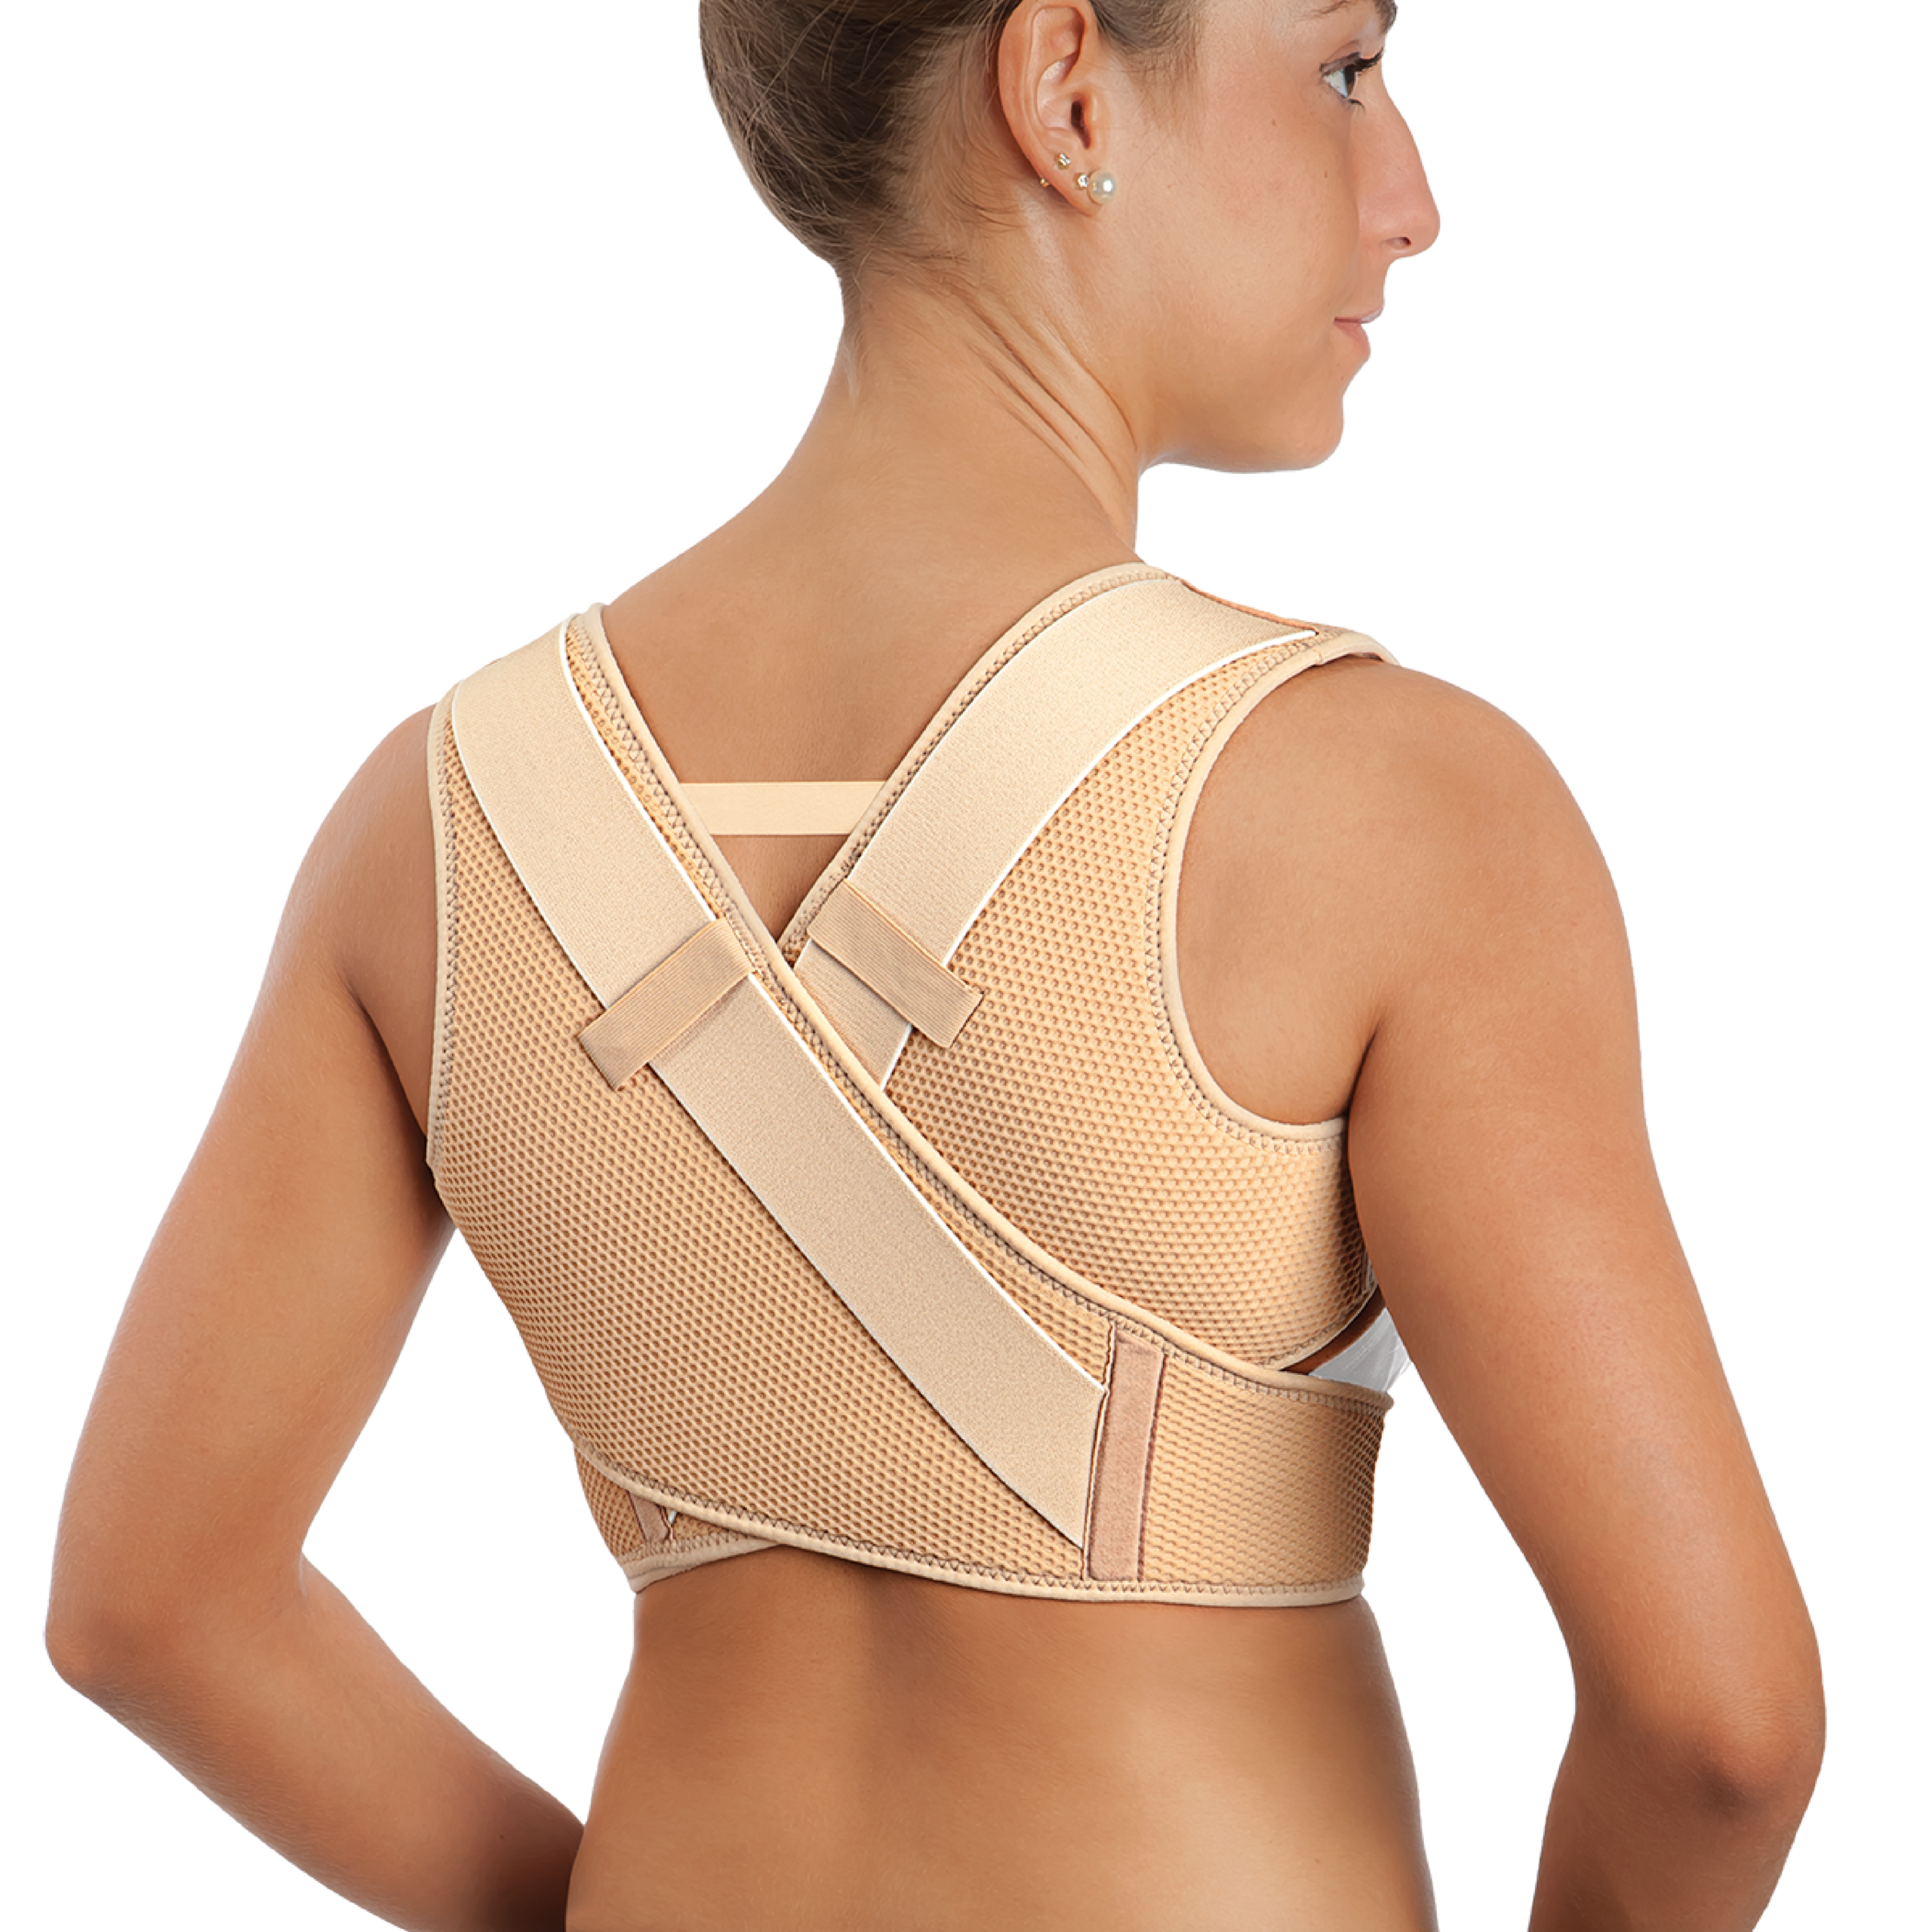 Figure-of-8 Posture Support